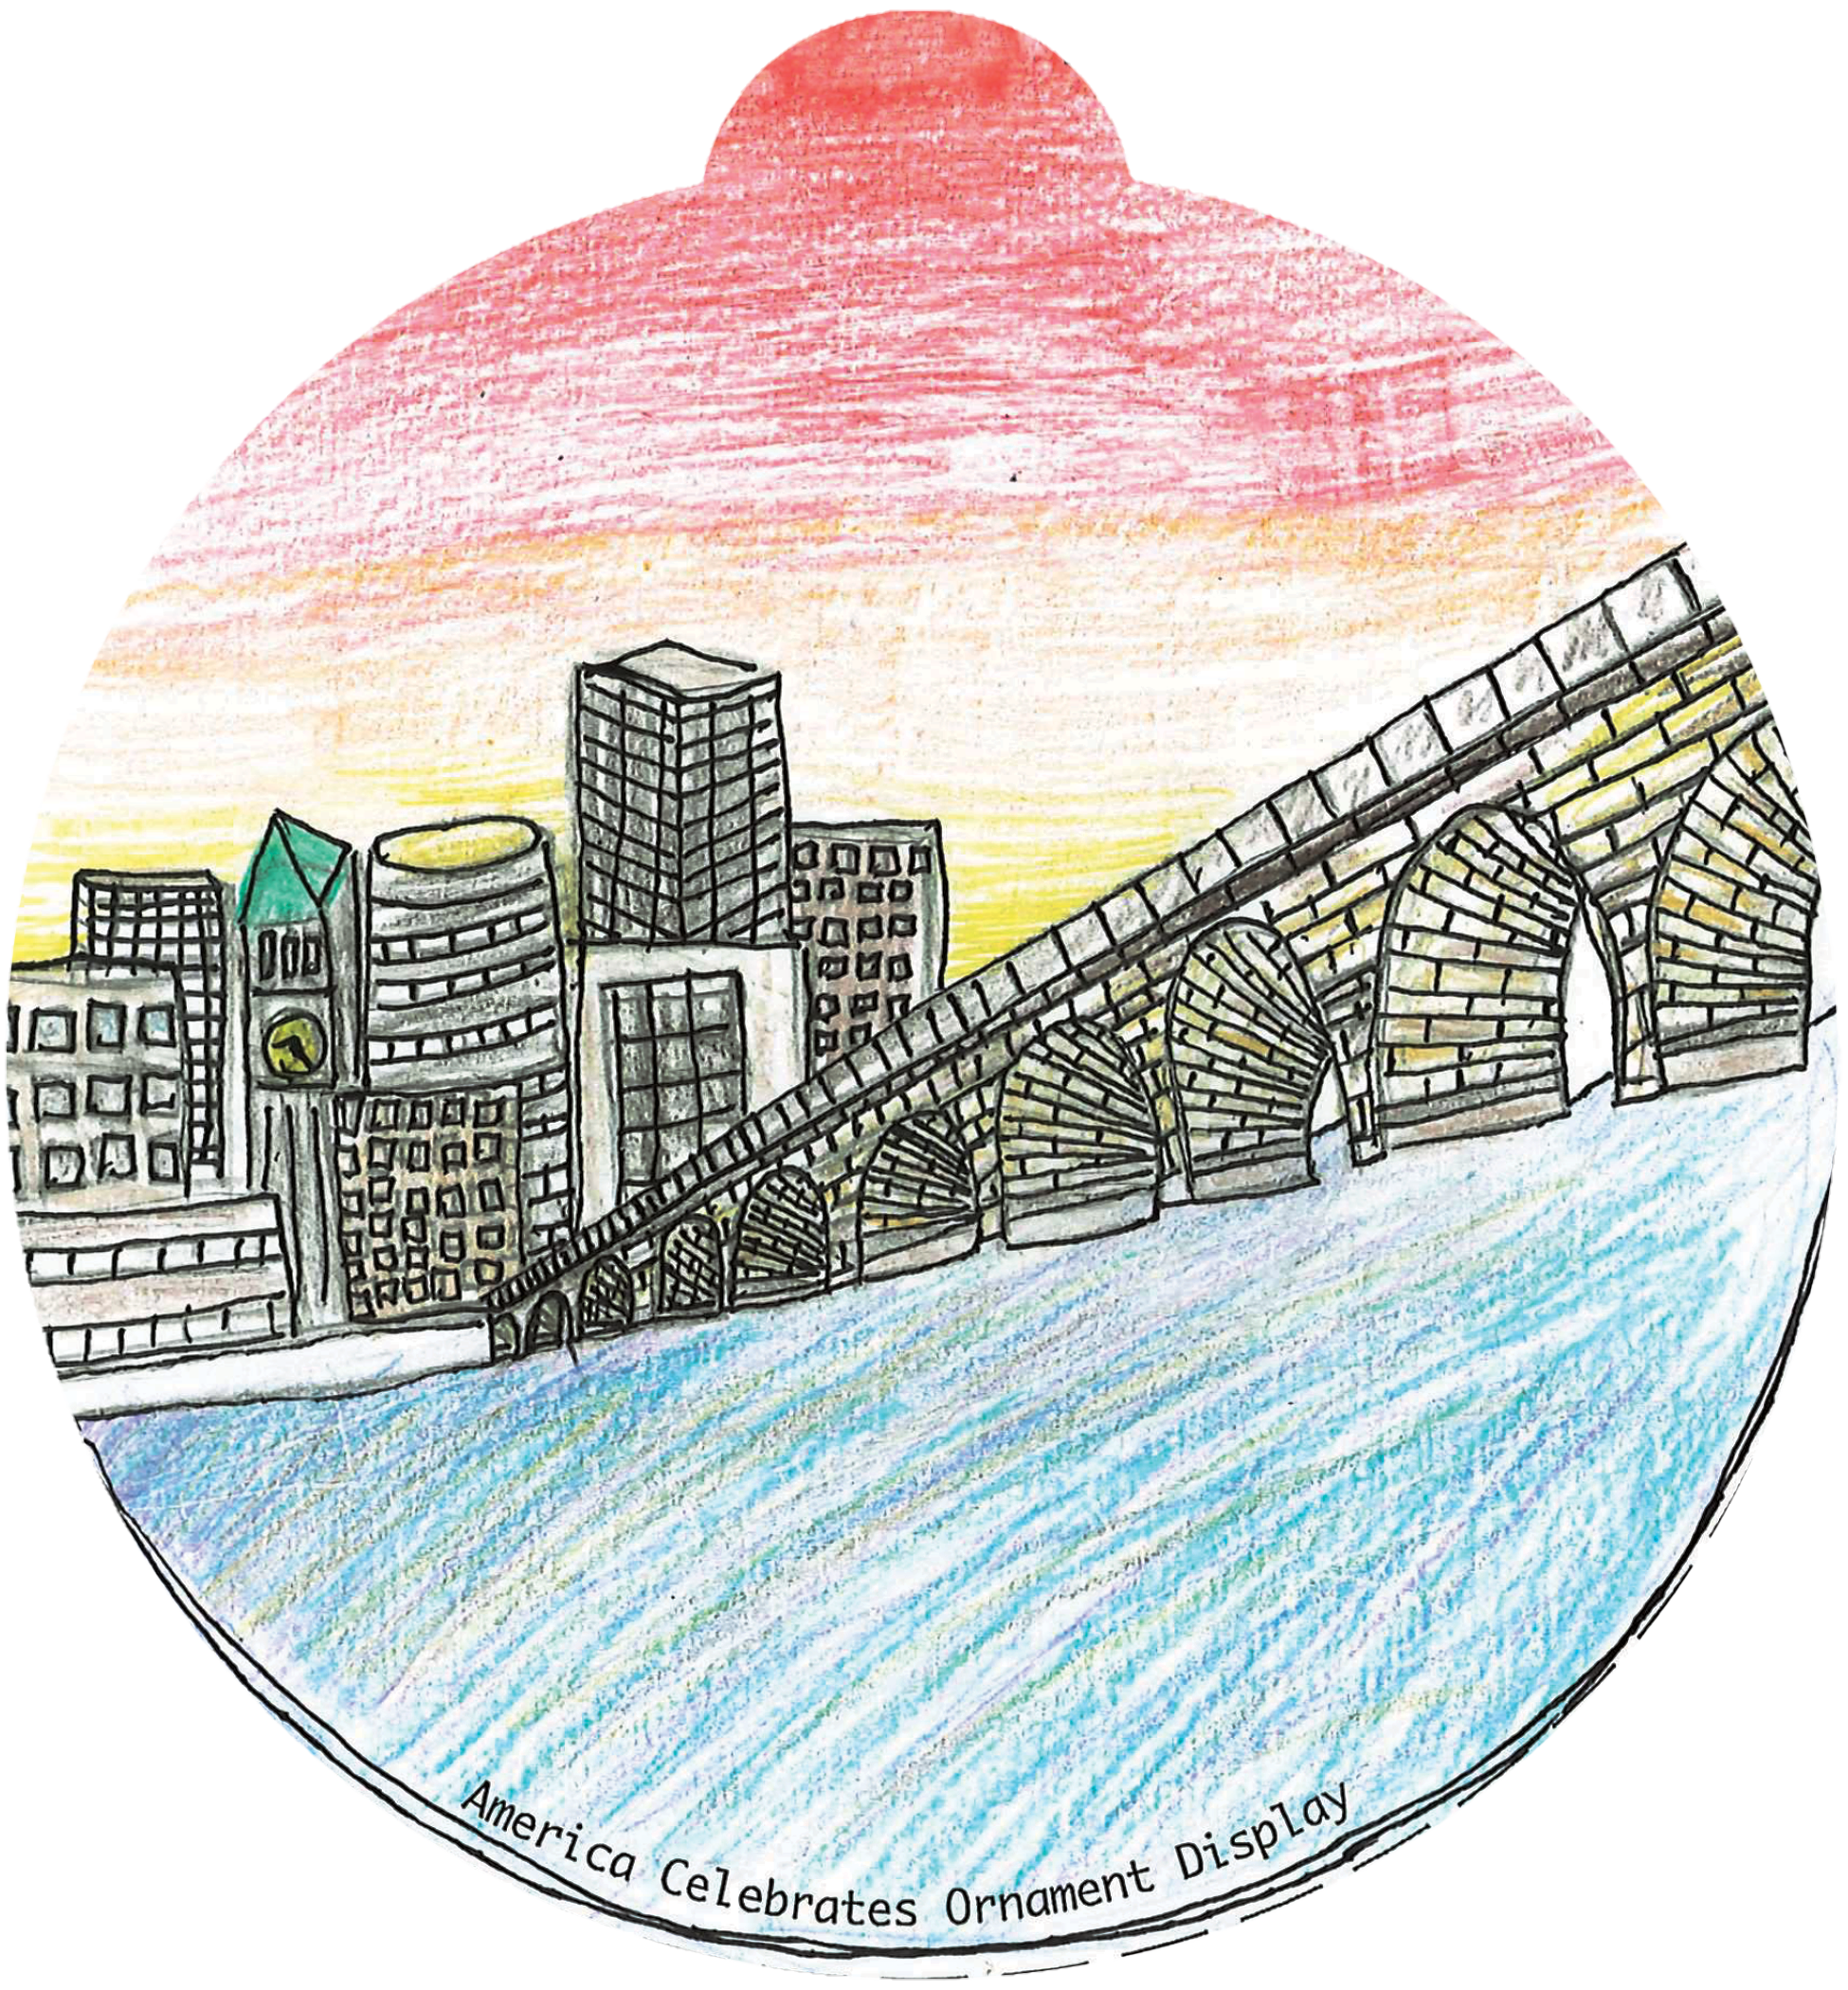 Ornament depicting a bridge over water stretching towards a city skyline